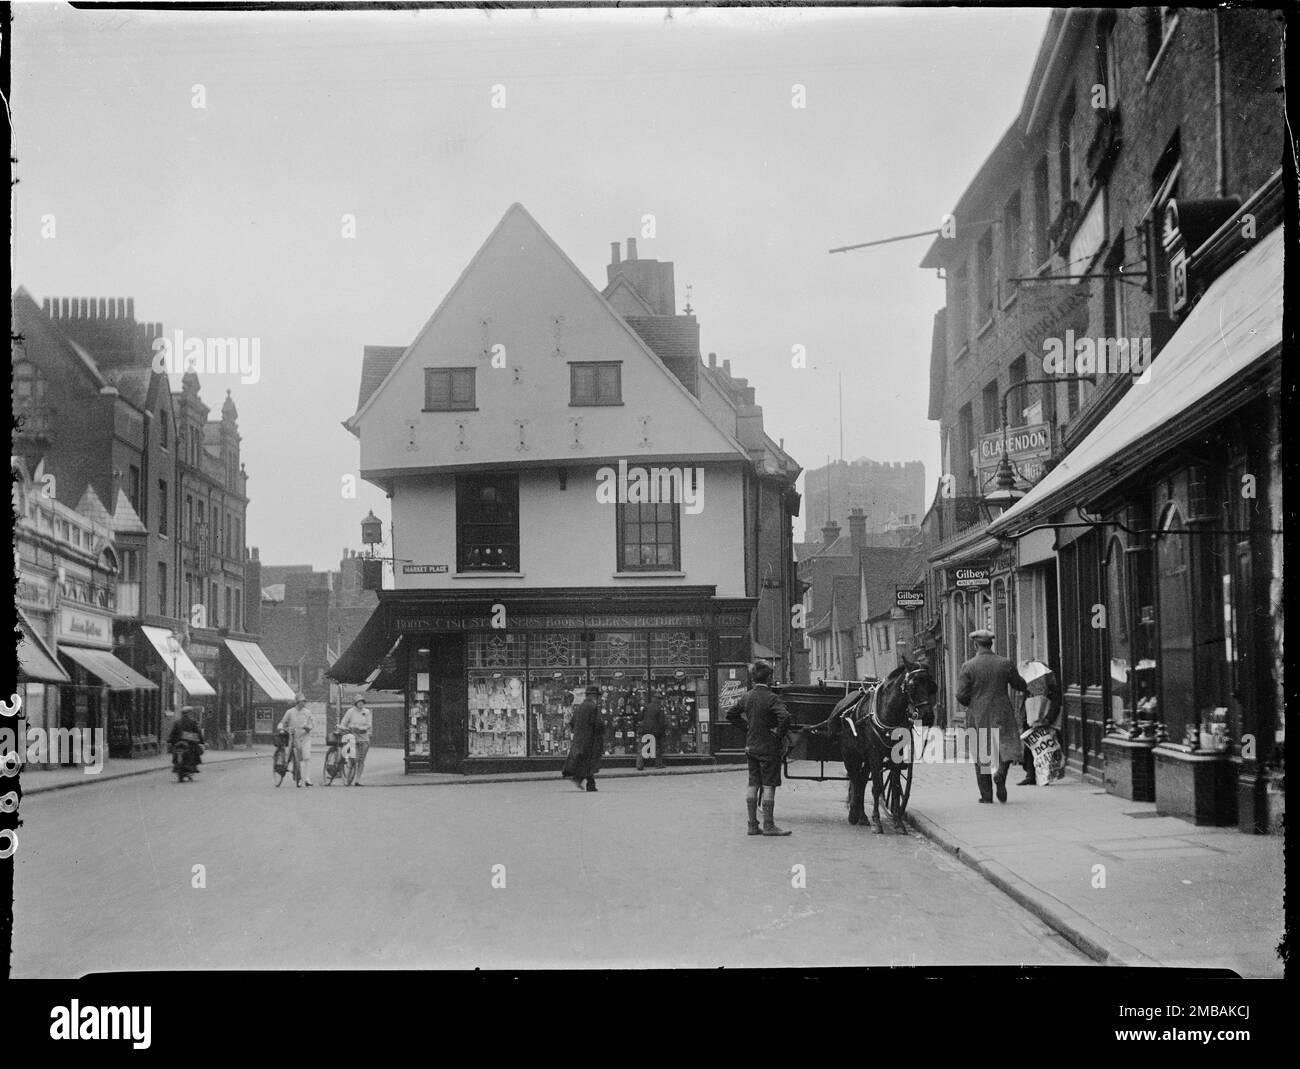 Market Place, St Albans, Hertfordshire, 1928. Looking south-west along the Market Place towards the north gable end of number 13 and the tower of St Albans Cathedral in the distance, with a few pedestrians and a horse drawn buggy in the foreground. Stock Photo